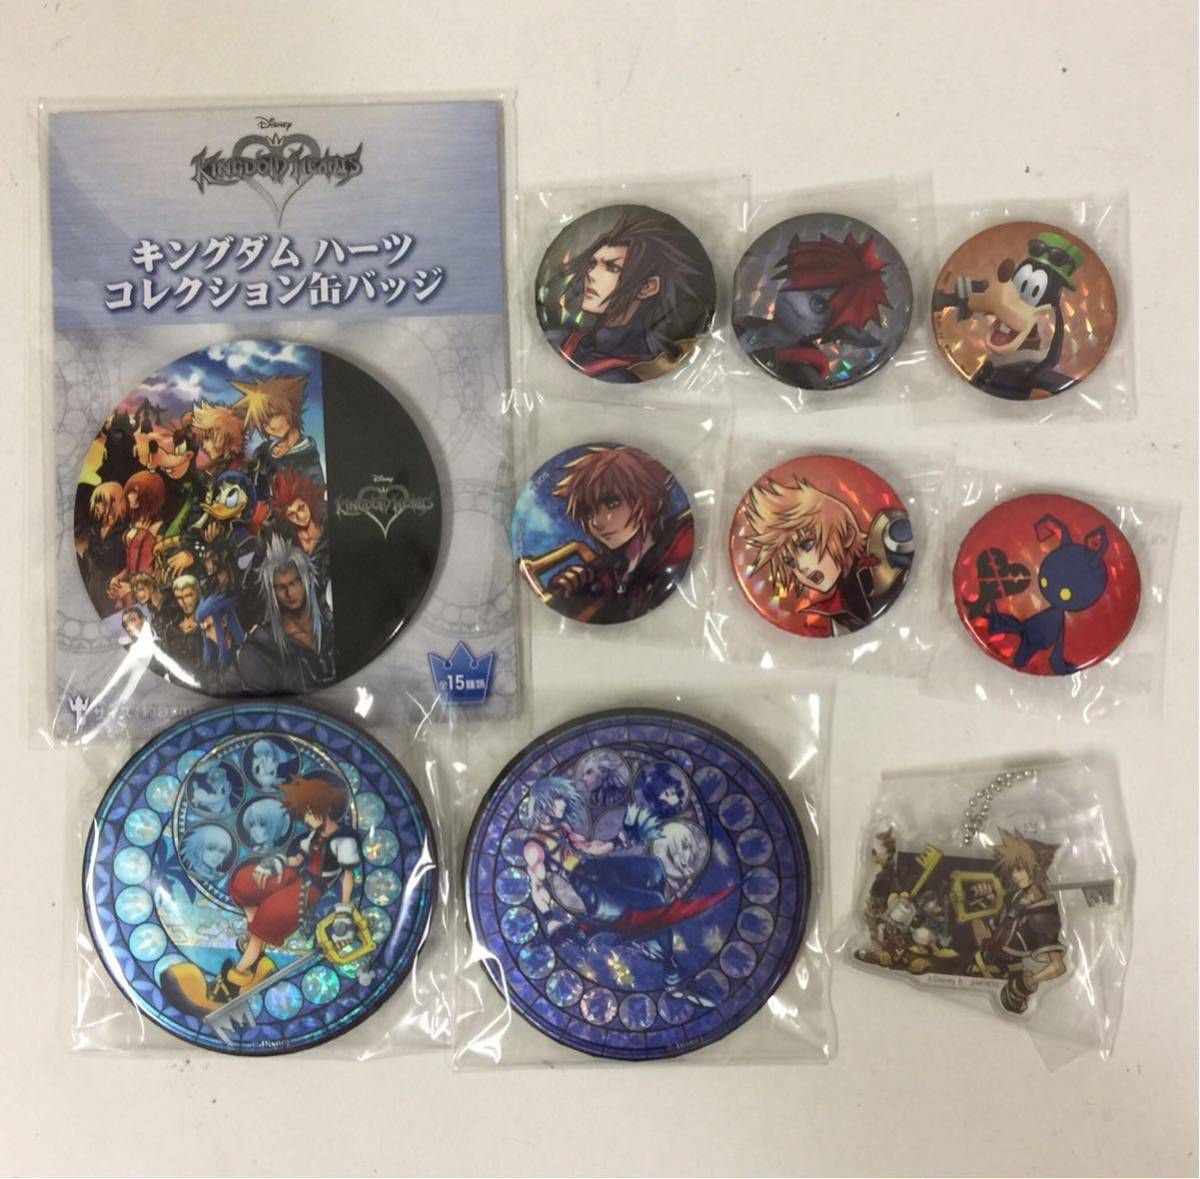 This is an offer made on the Request: Kingdom Hearts Square Enix